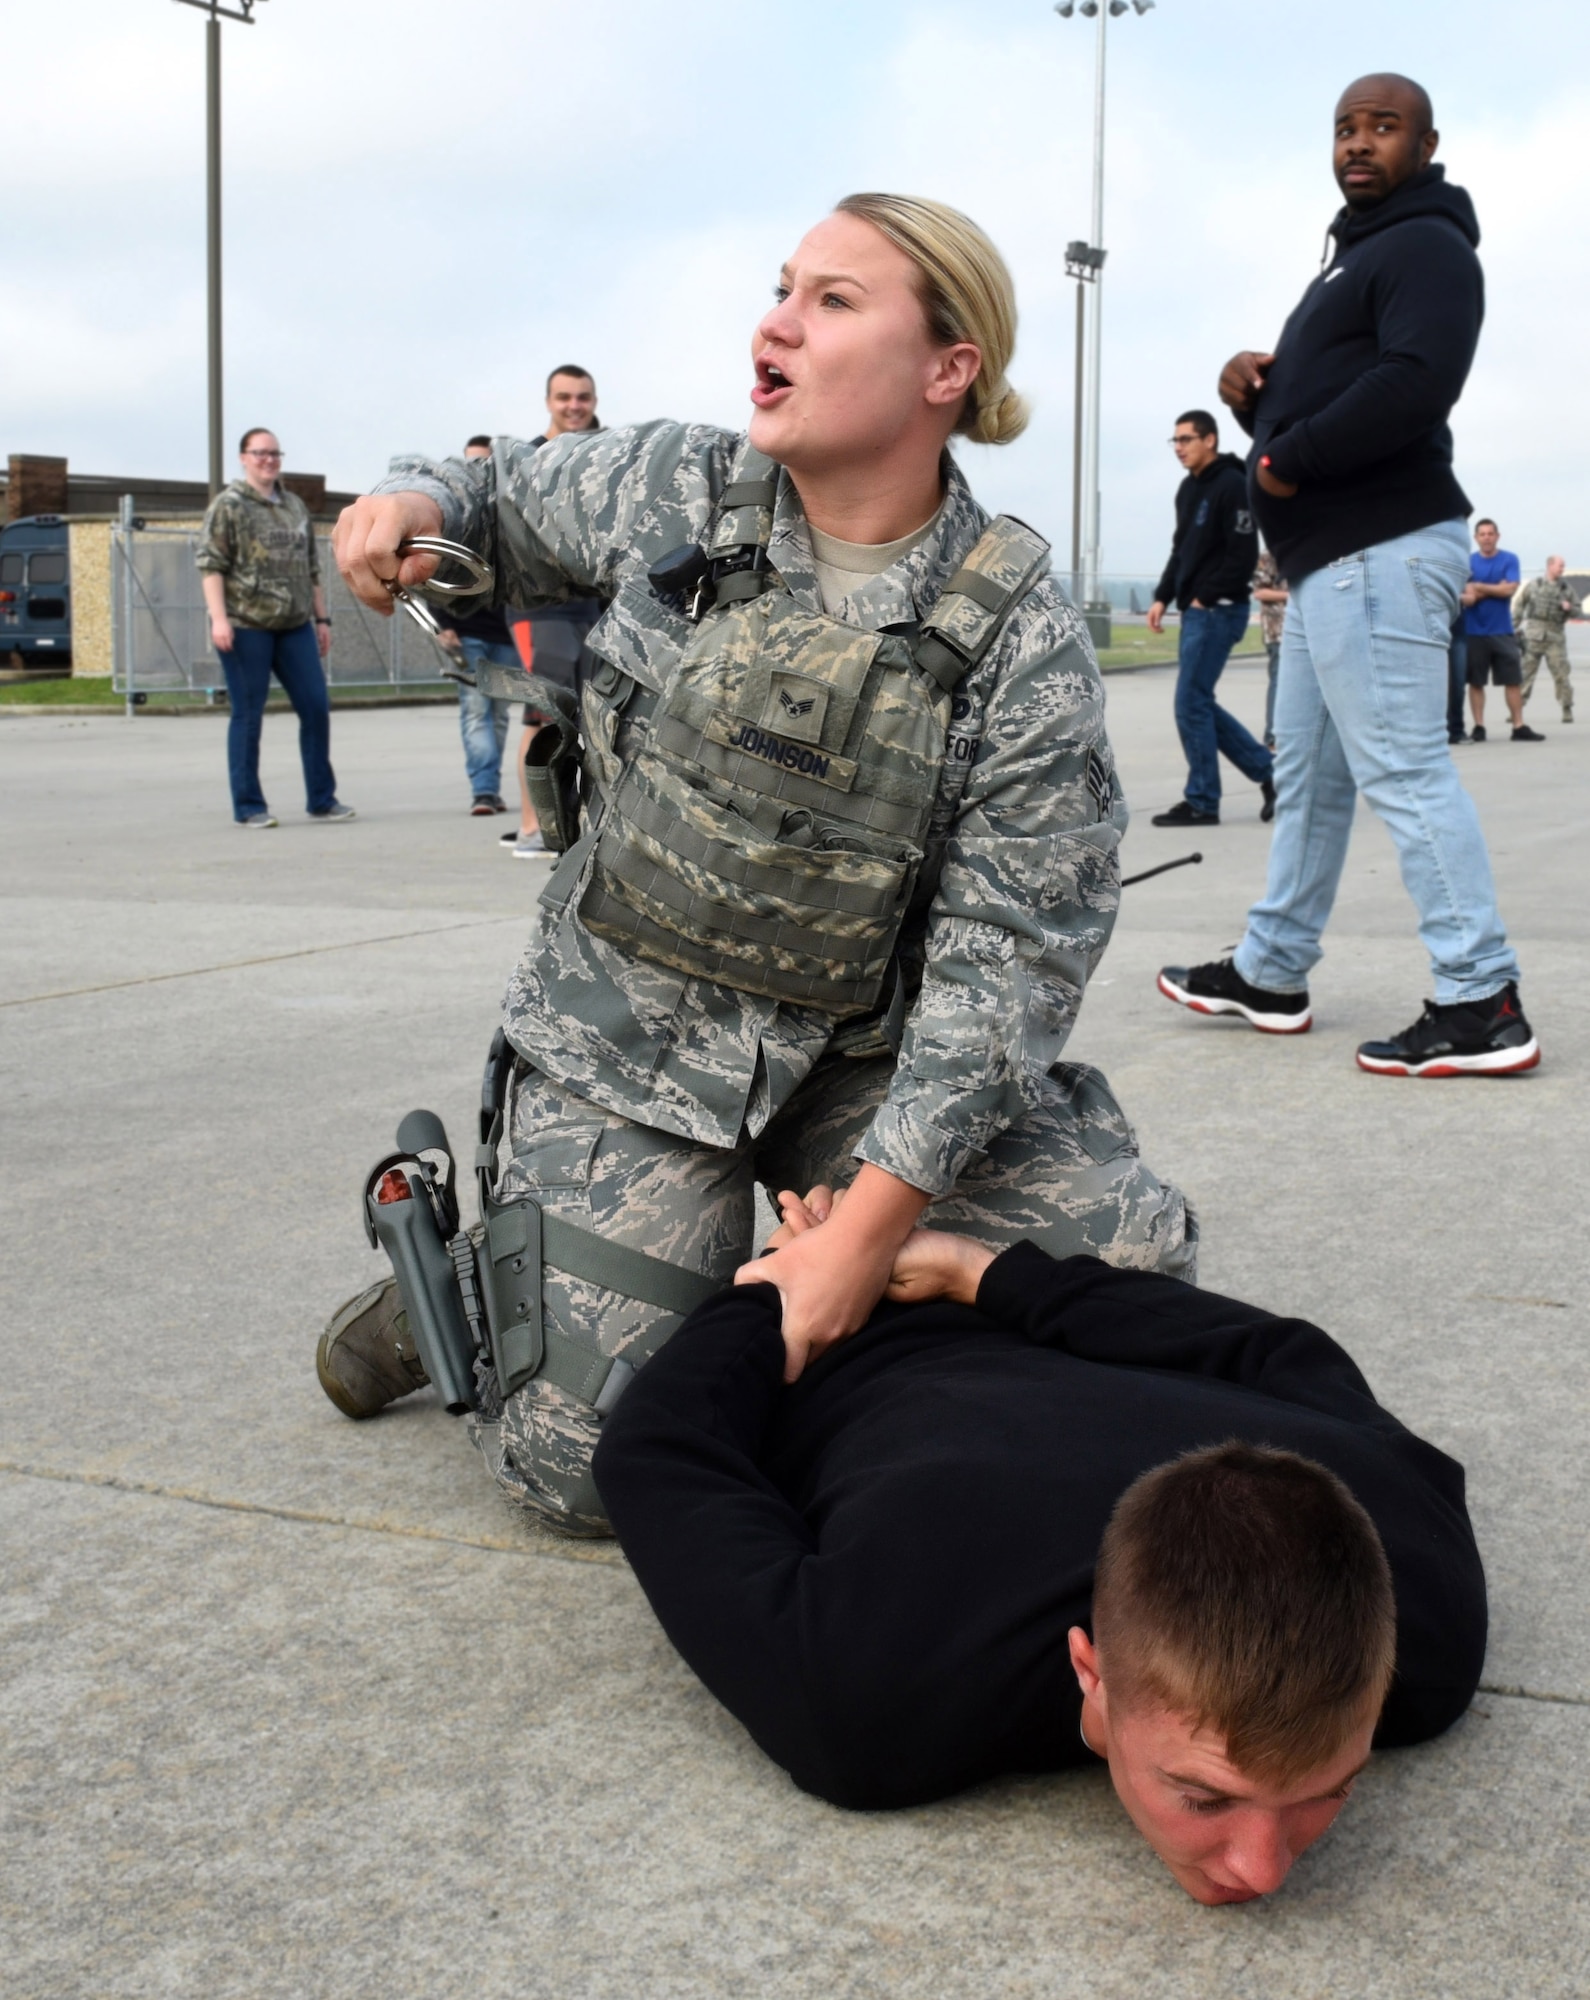 Senior Airman Paige E. Johnson, 4th Security Forces Squadron patrolman, apprehends simulated stabbing suspect, Senior Airman Alexander Ritsema, 4th Maintenance Group weapons standardization technician, as another participant prepares to detonate a simulated bomb vest, during a Major Accident Response Exercise, May 10, 2017, at Seymour Johnson Air Force Base, North Carolina. During the exercise members from the 4th Security Forces Squadron detained the suspect, evacuated the scene and set up a perimeter around the area. (U.S. Air Force photo by Airman 1st Class Victoria Boyton)